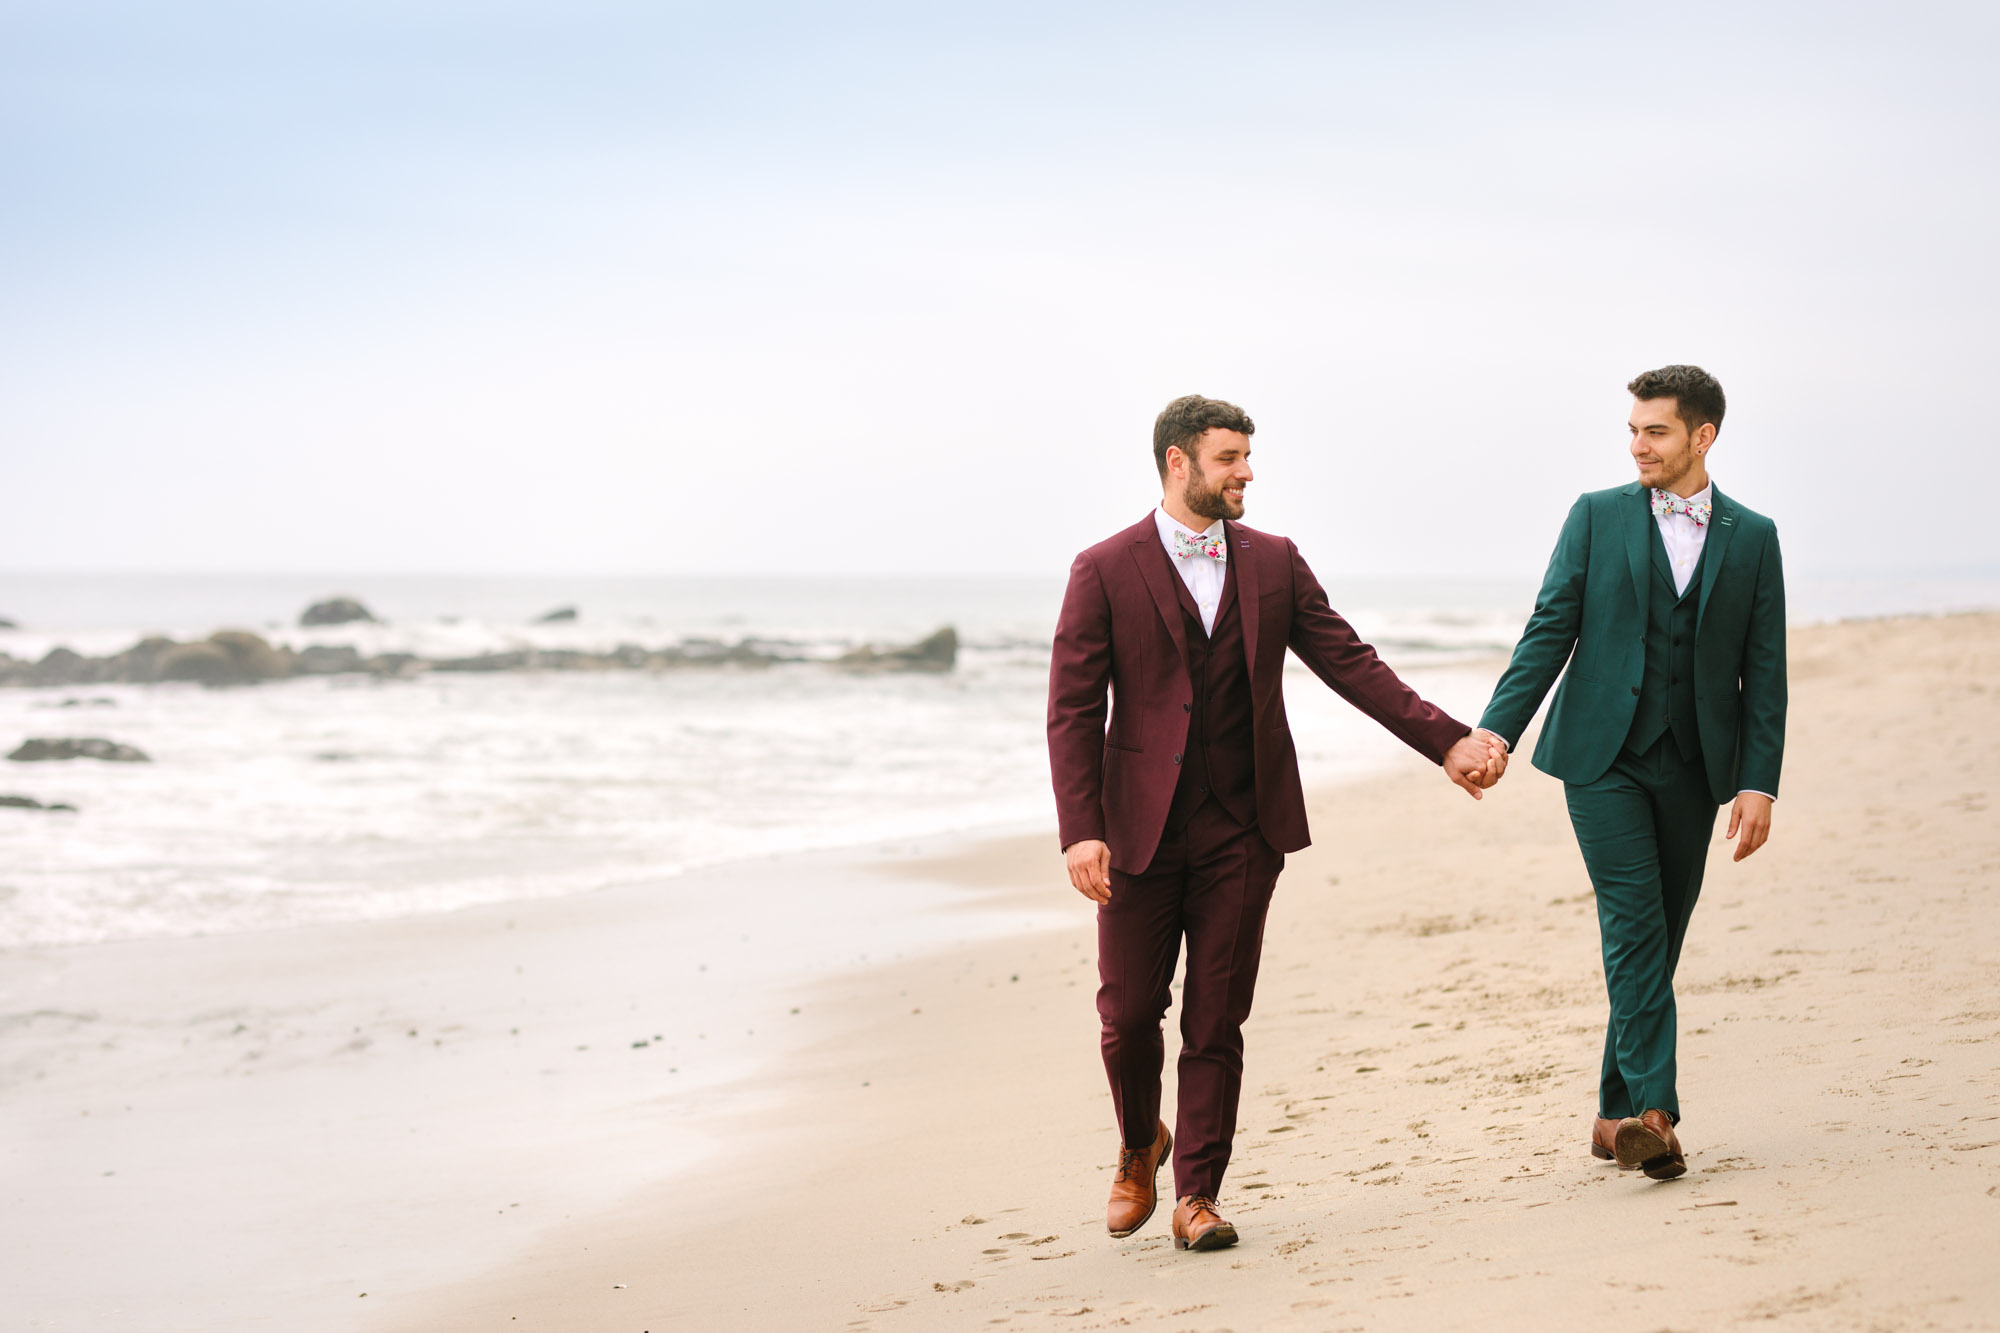 Adam and KC in Malibu by Groom getting ready in emerald tux by Mary Costa Photography